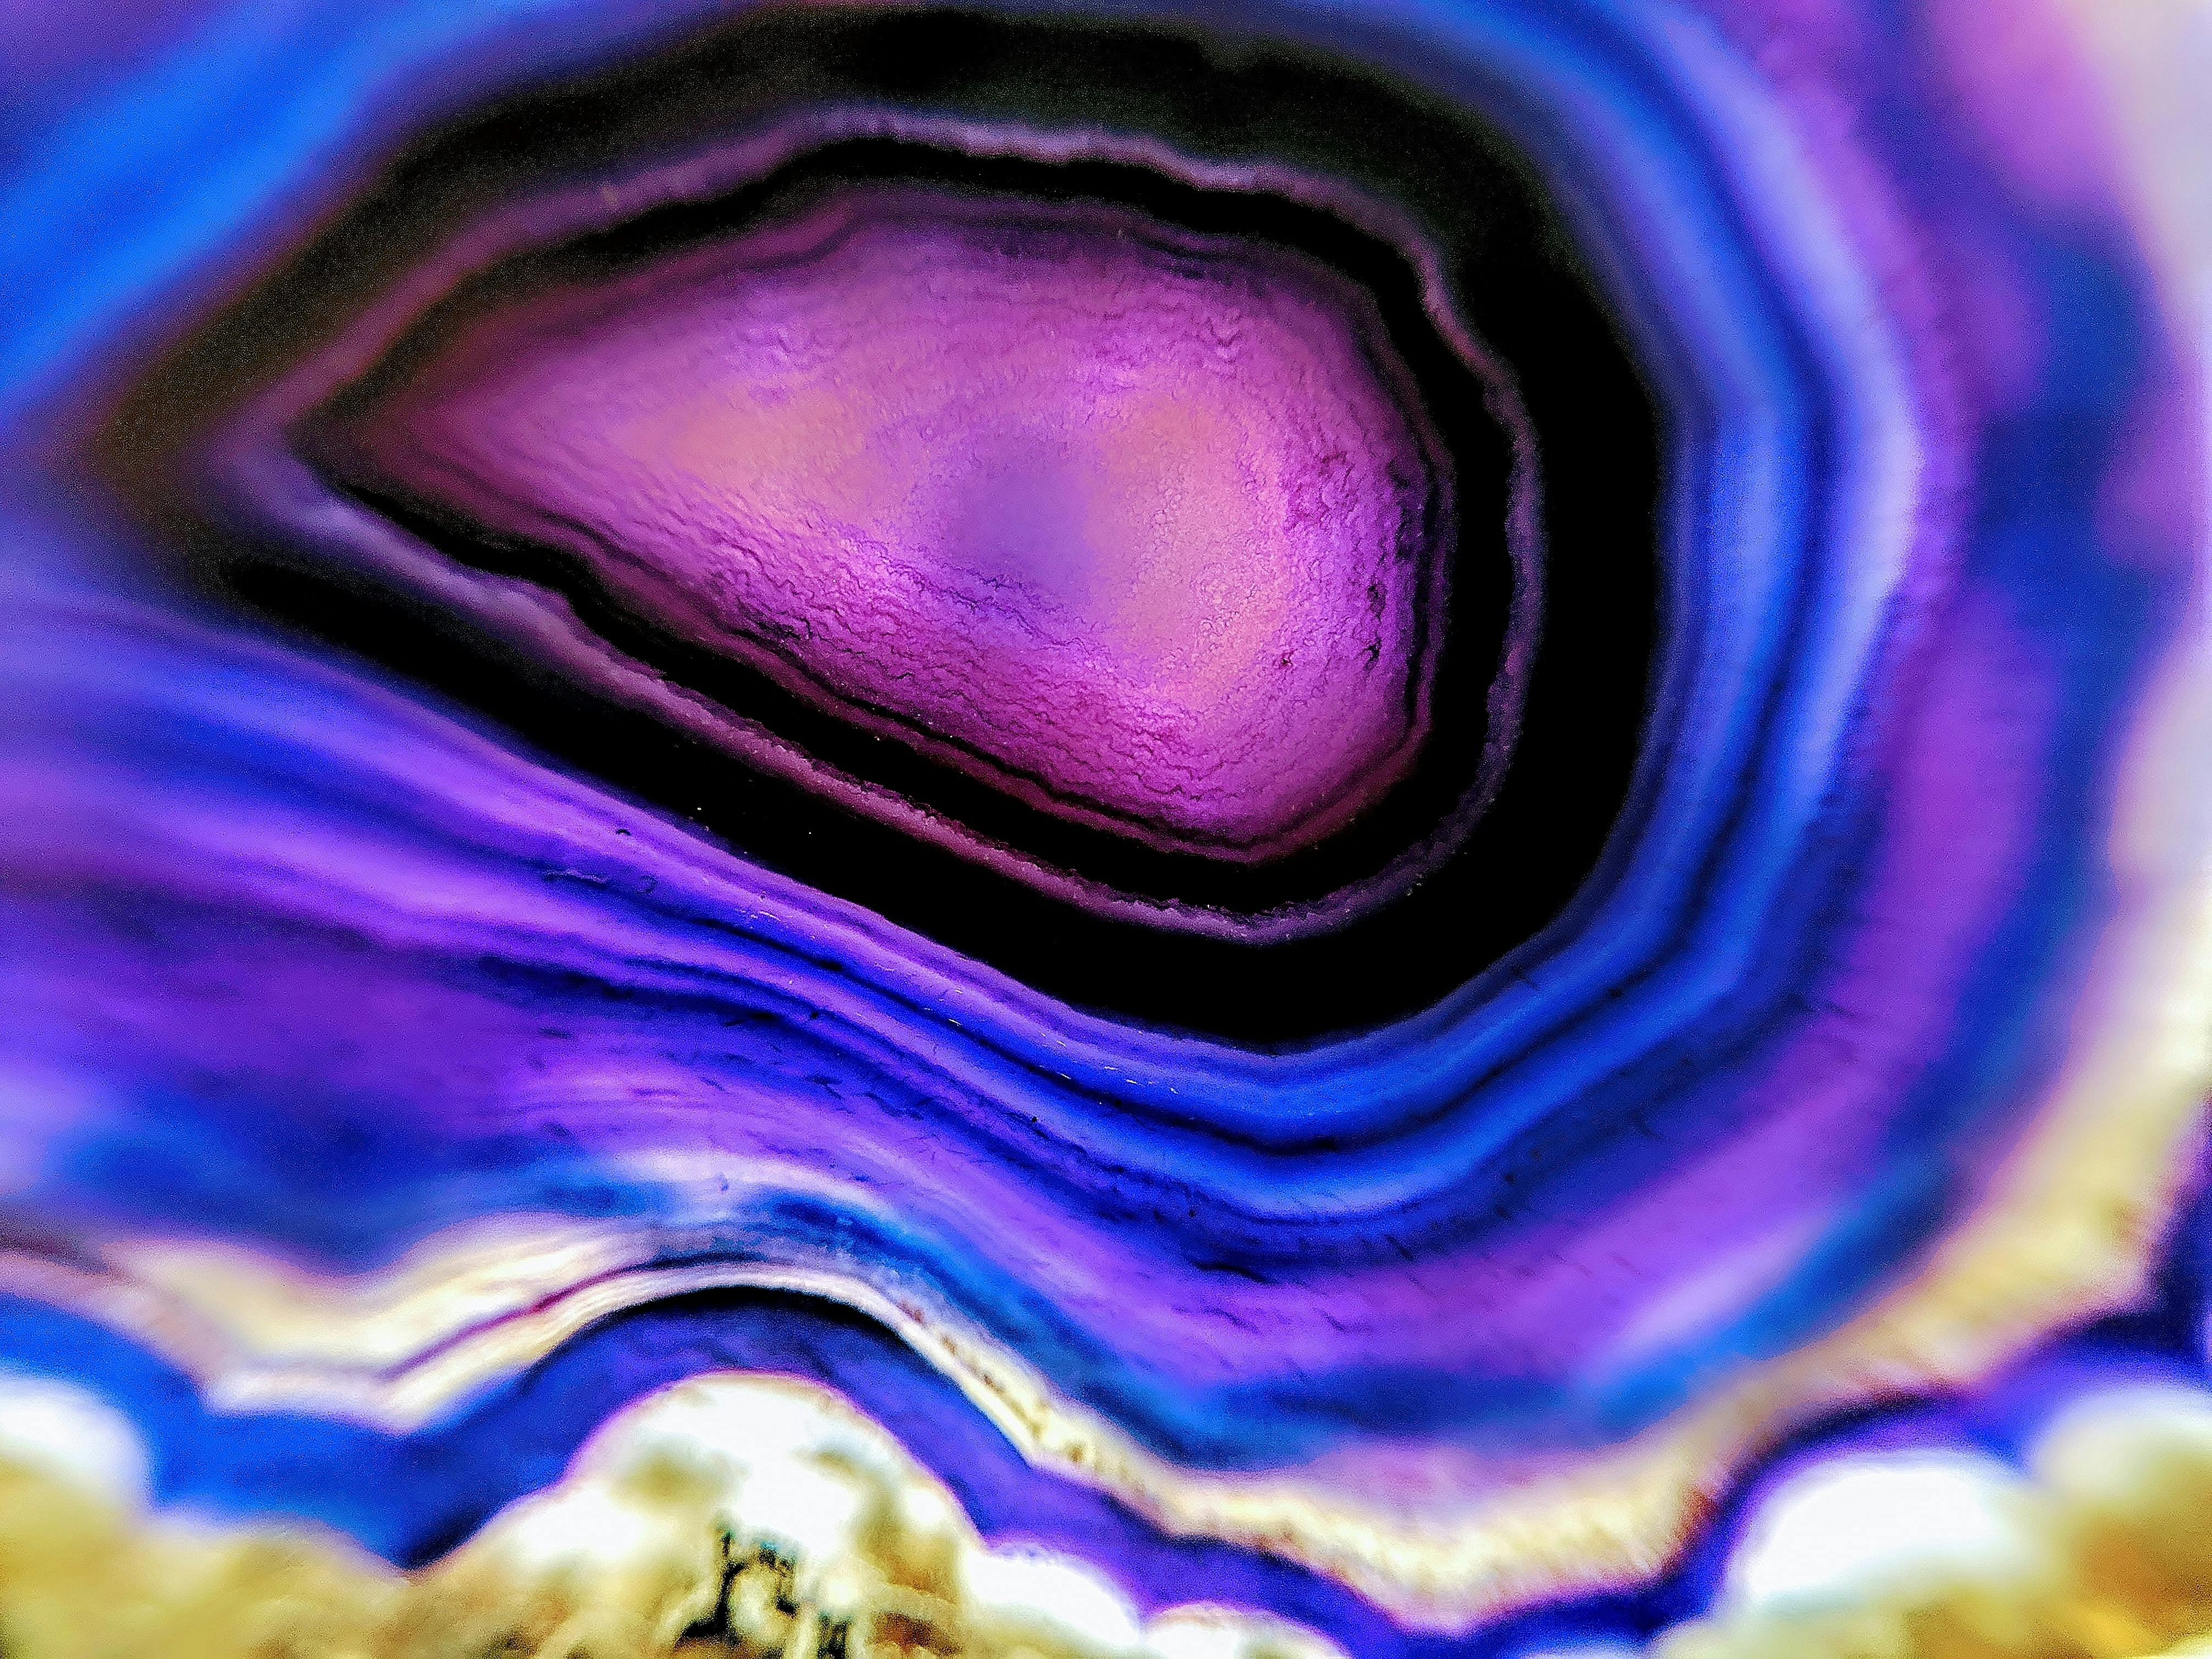 Free stock photo of Pink geode, pink marble, purple geode